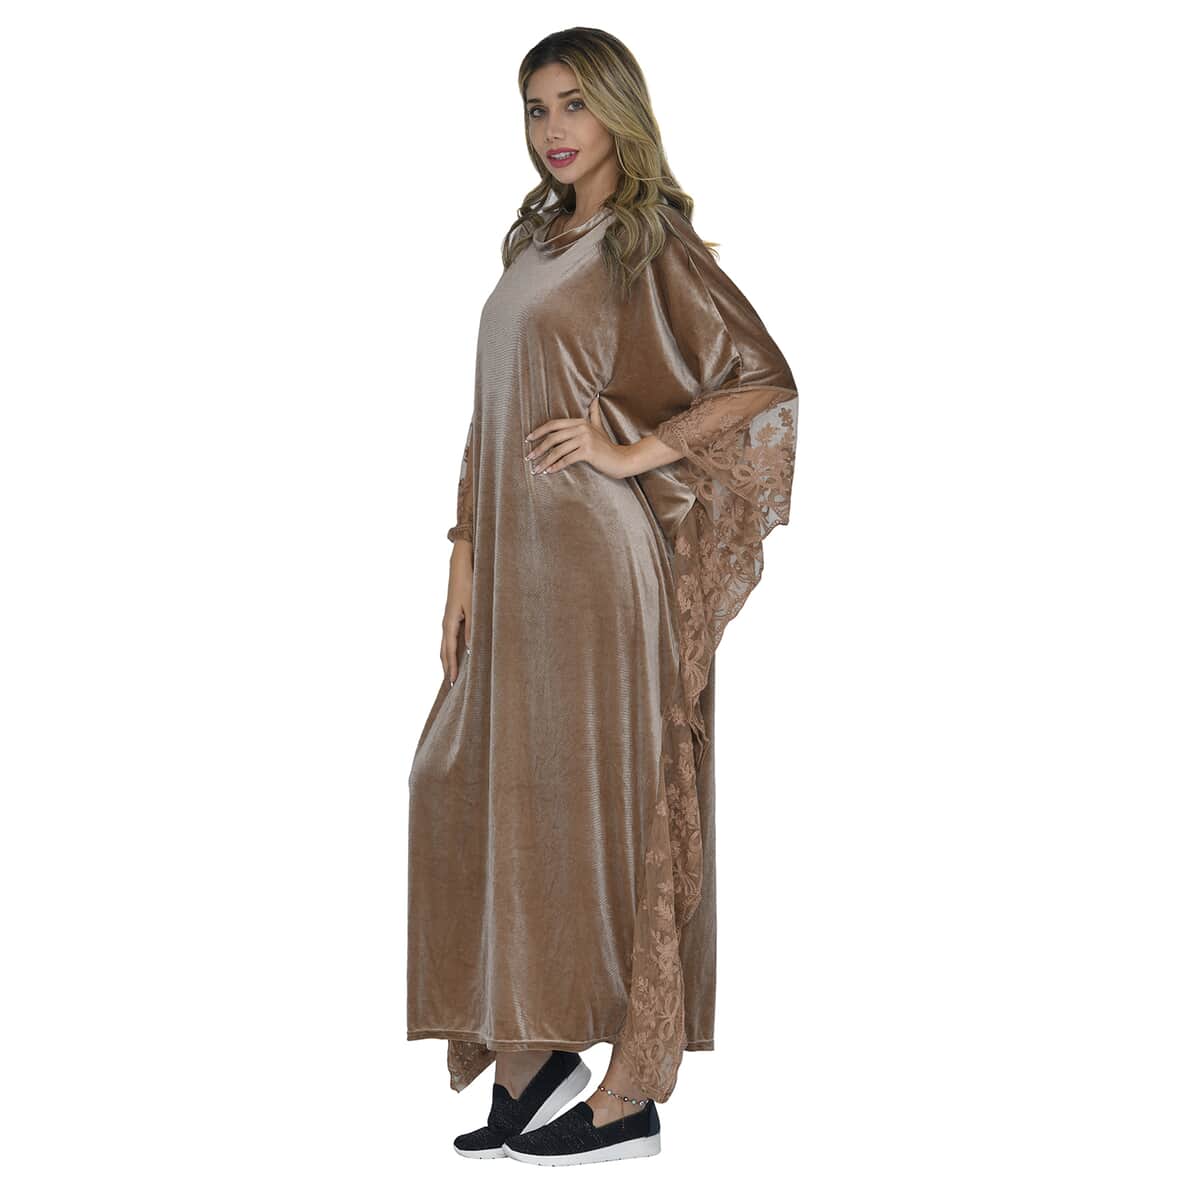 Tamsy Black Label - Lux Stretch Velvet Kaftan with Lace in Caramel - One Size Fits Most image number 2